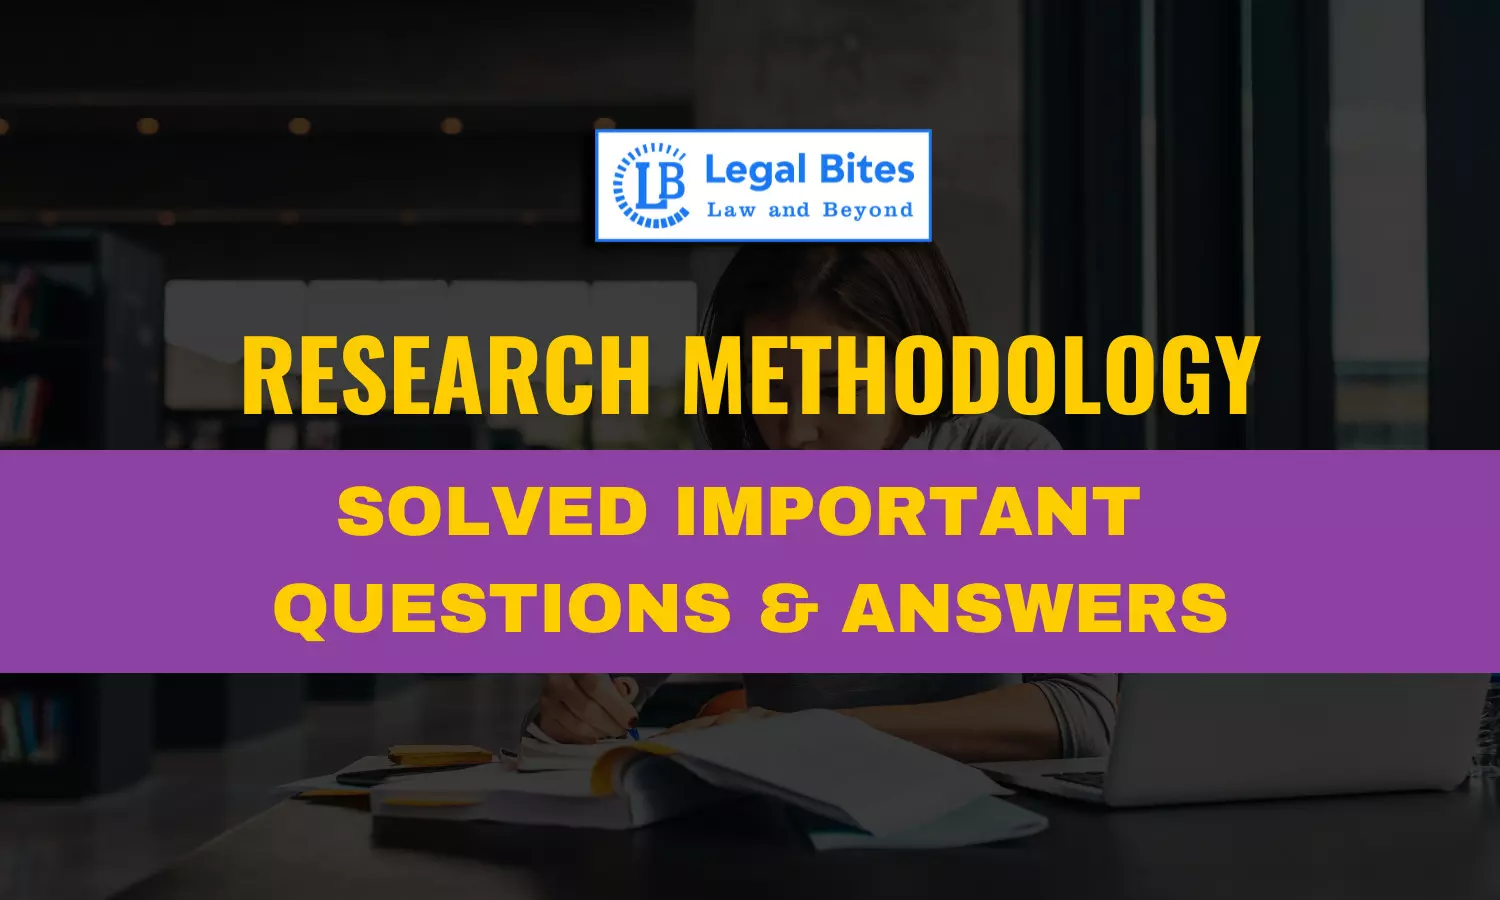 Explain Sampling Methods for Data Collection in Research. What are its advantages?